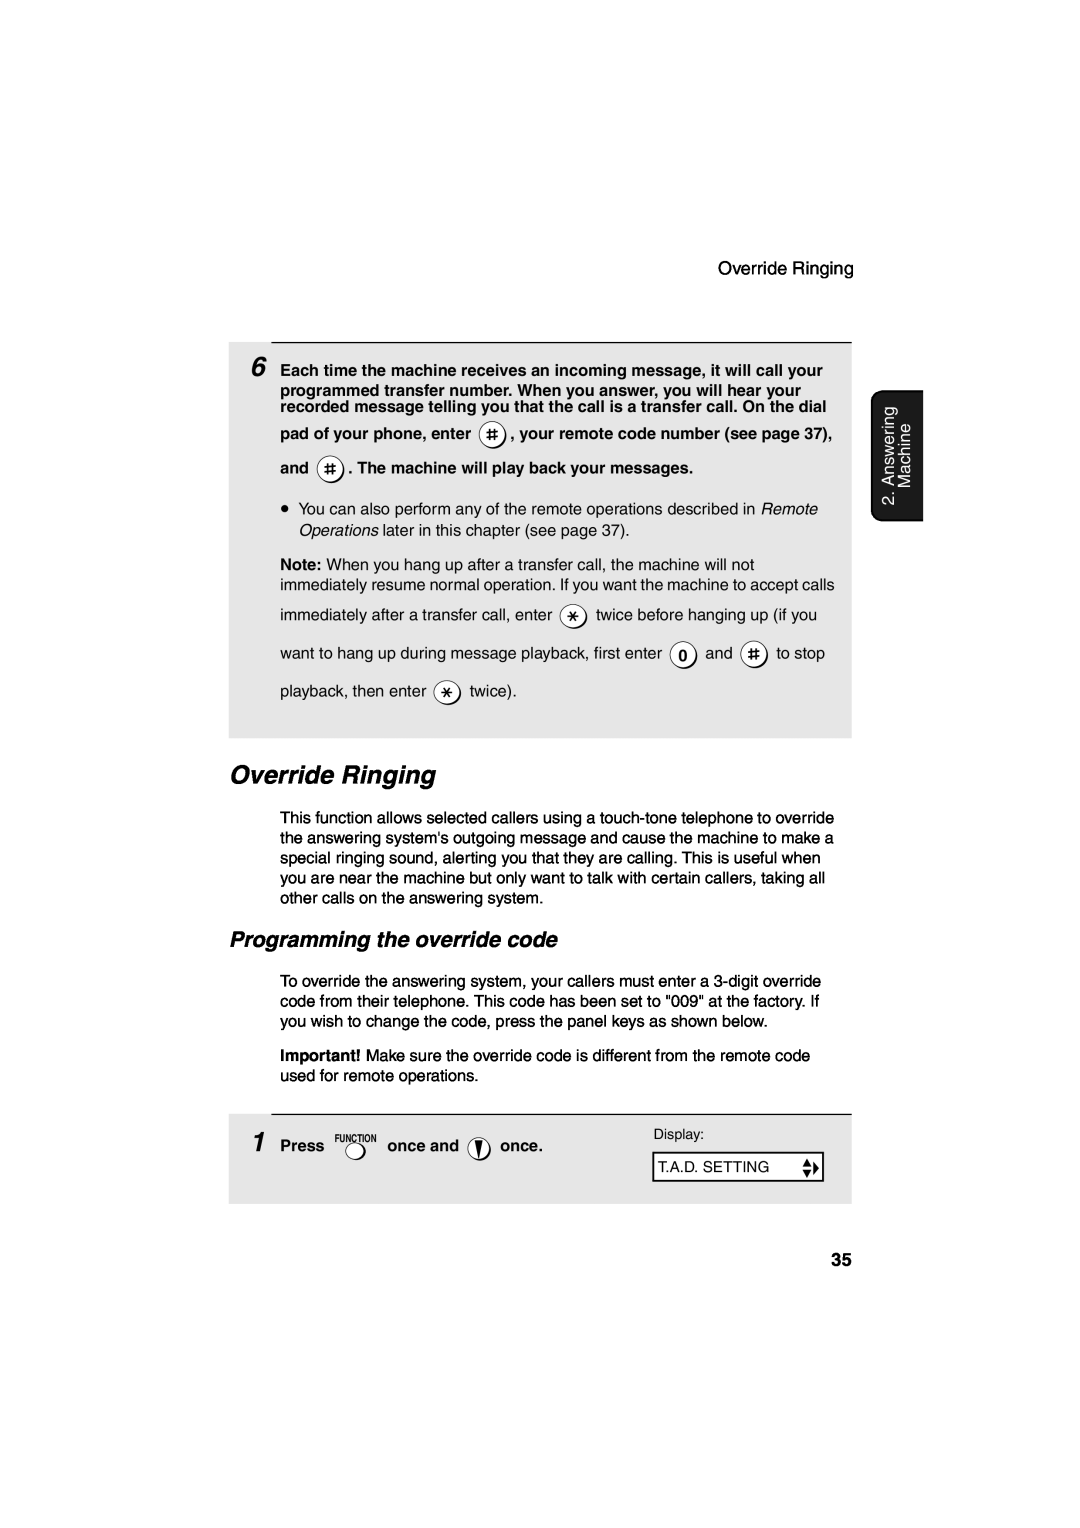 Sharp UX-A260 manual Override Ringing, Programming the override code, Answering, Machine 